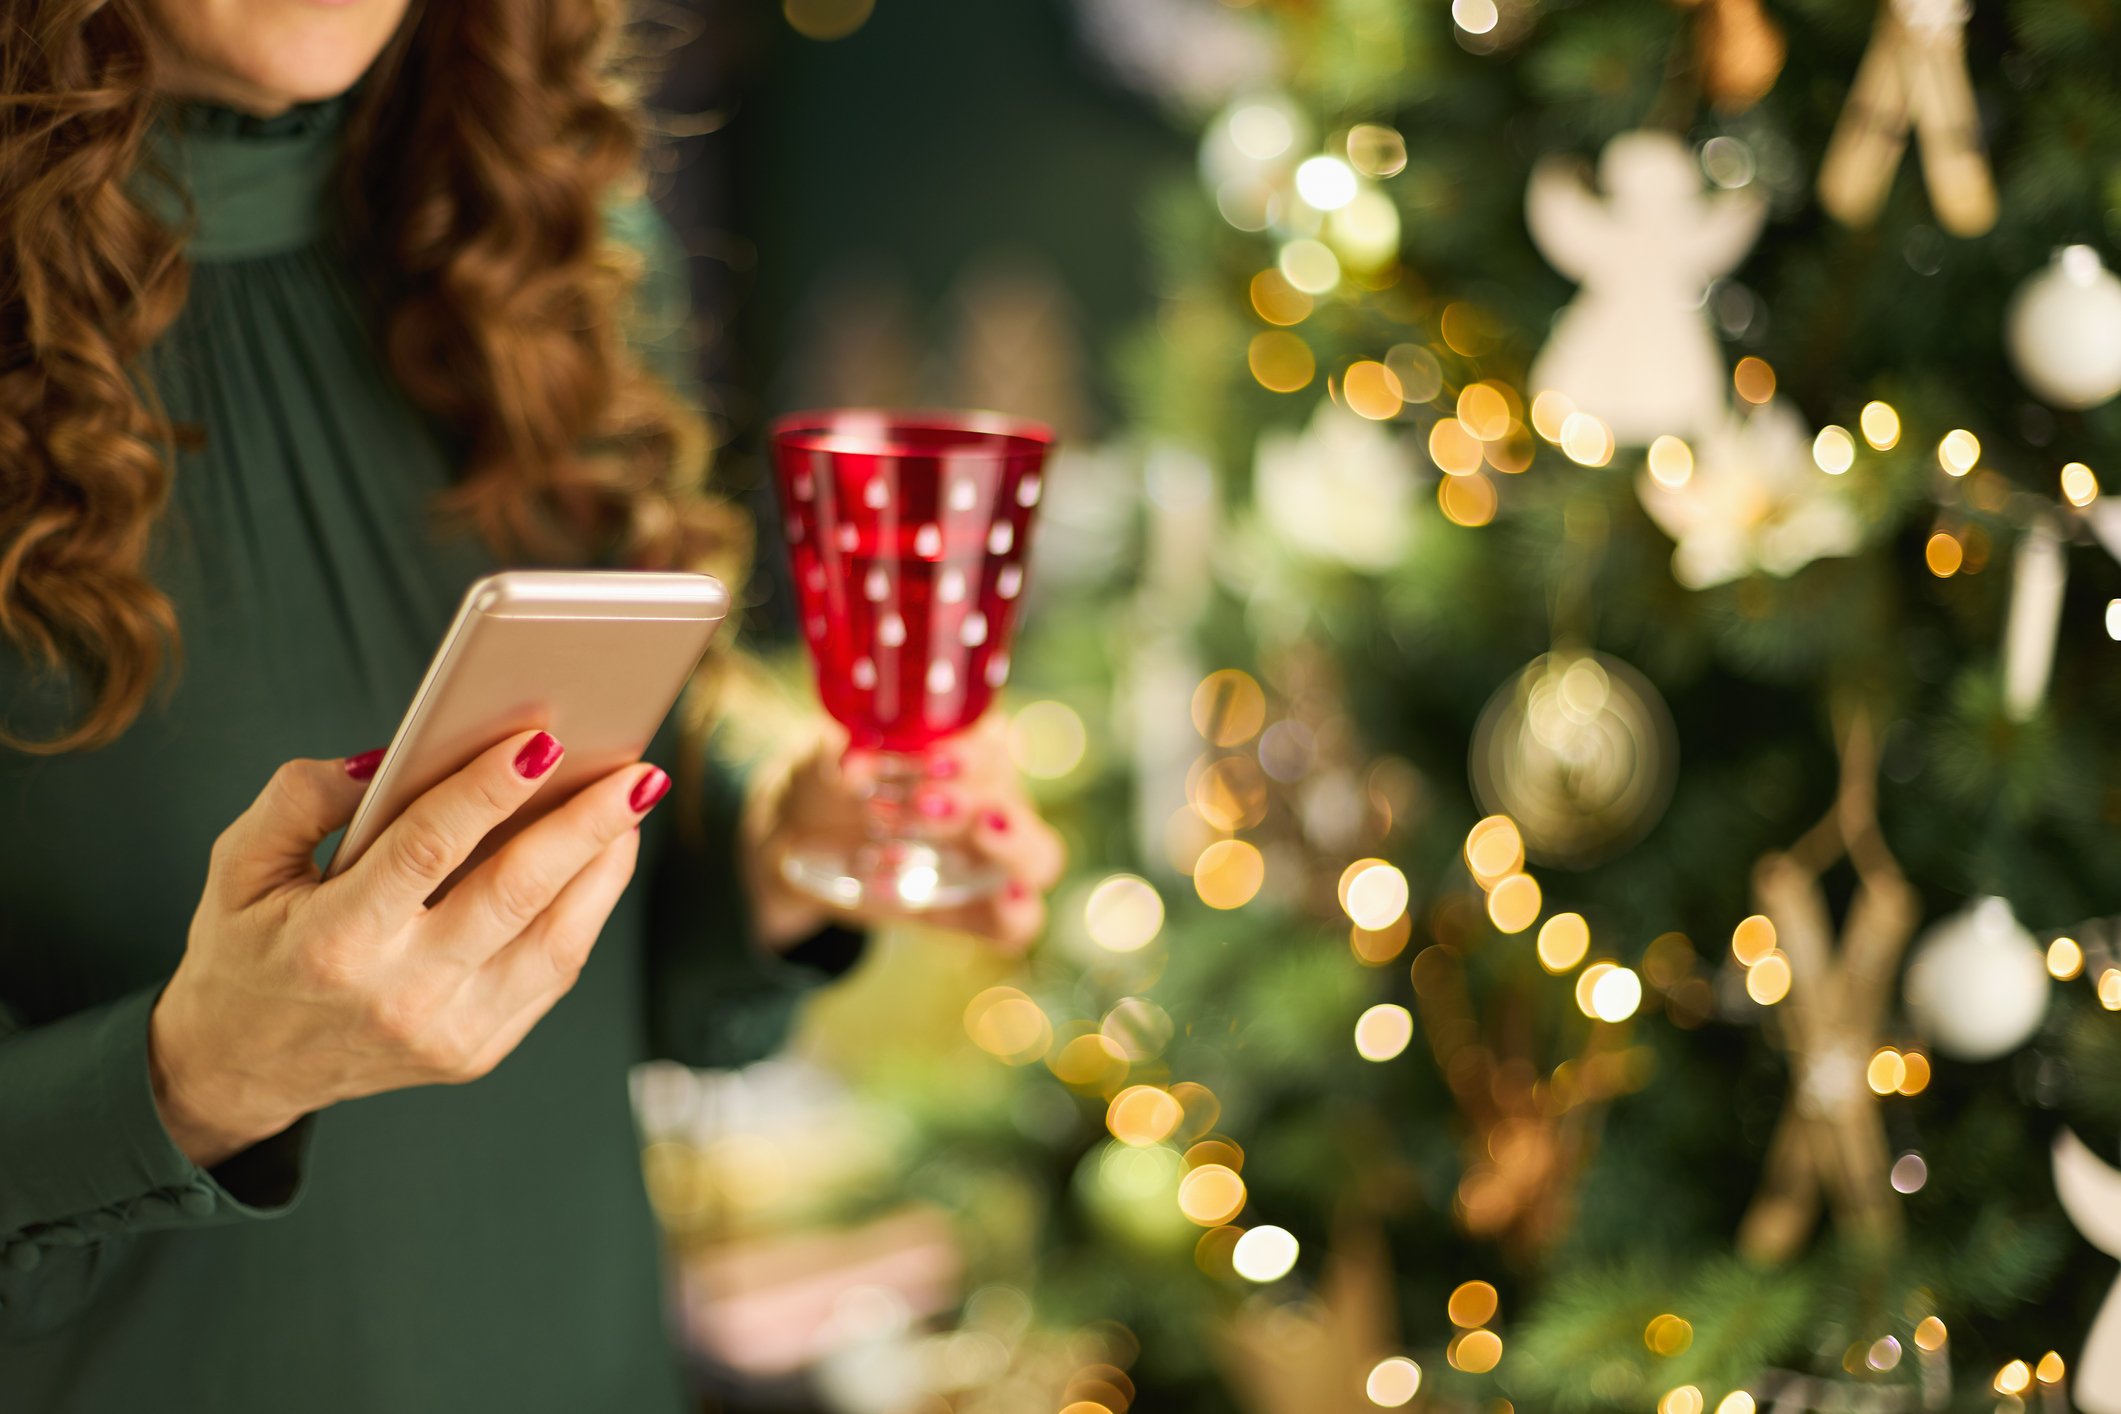 Woman on phone in front of Christmas tree